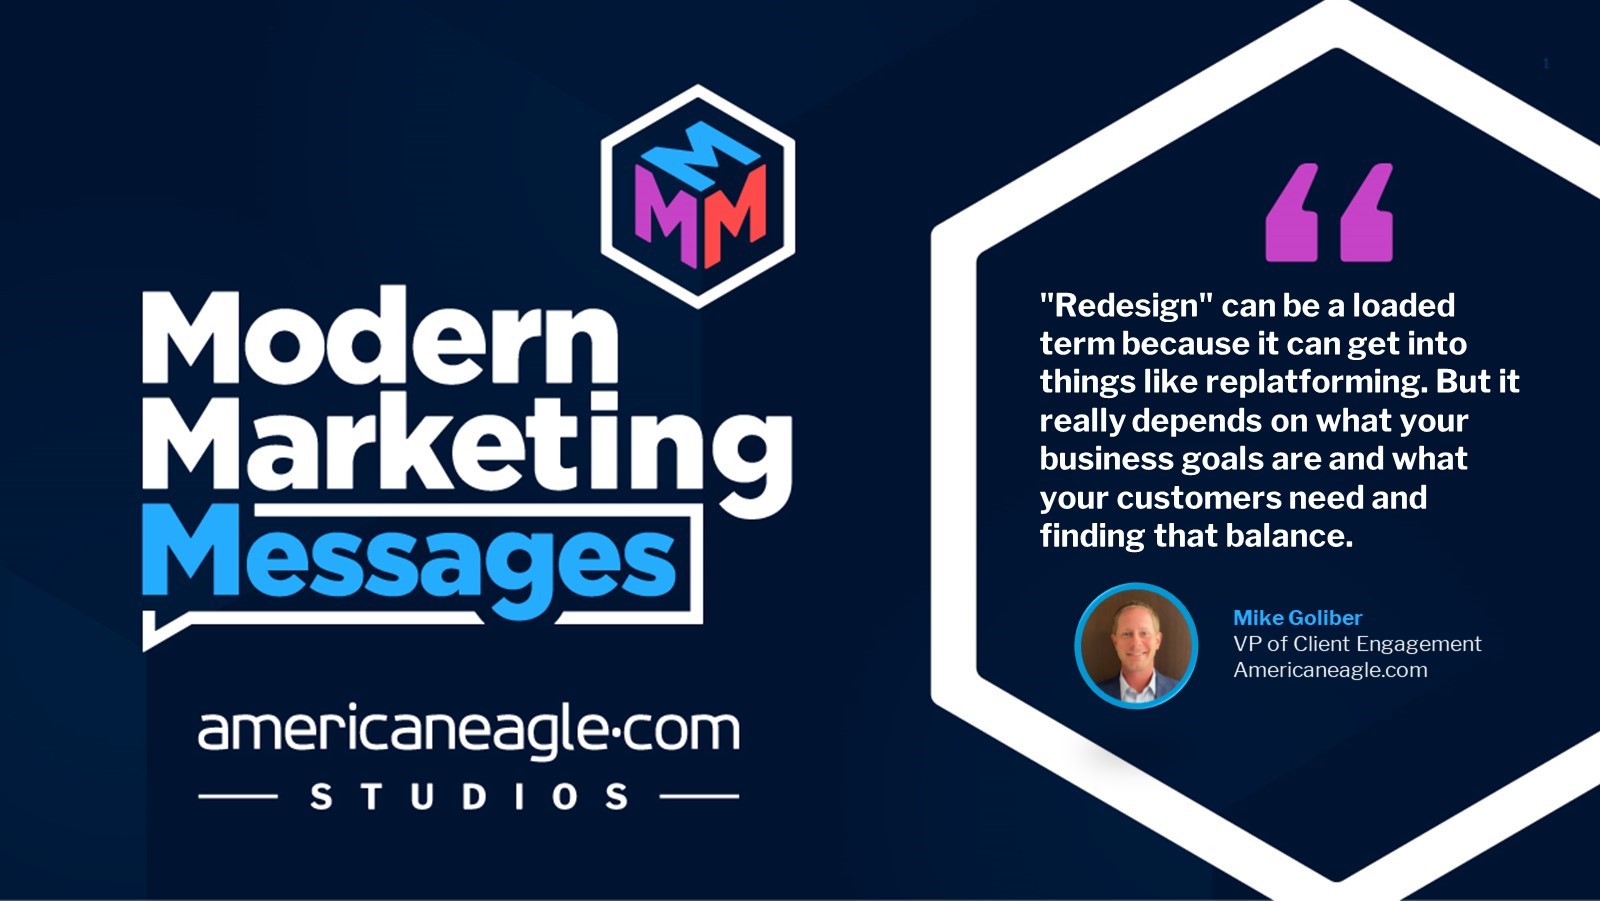 Mike Goliber quote on redesign